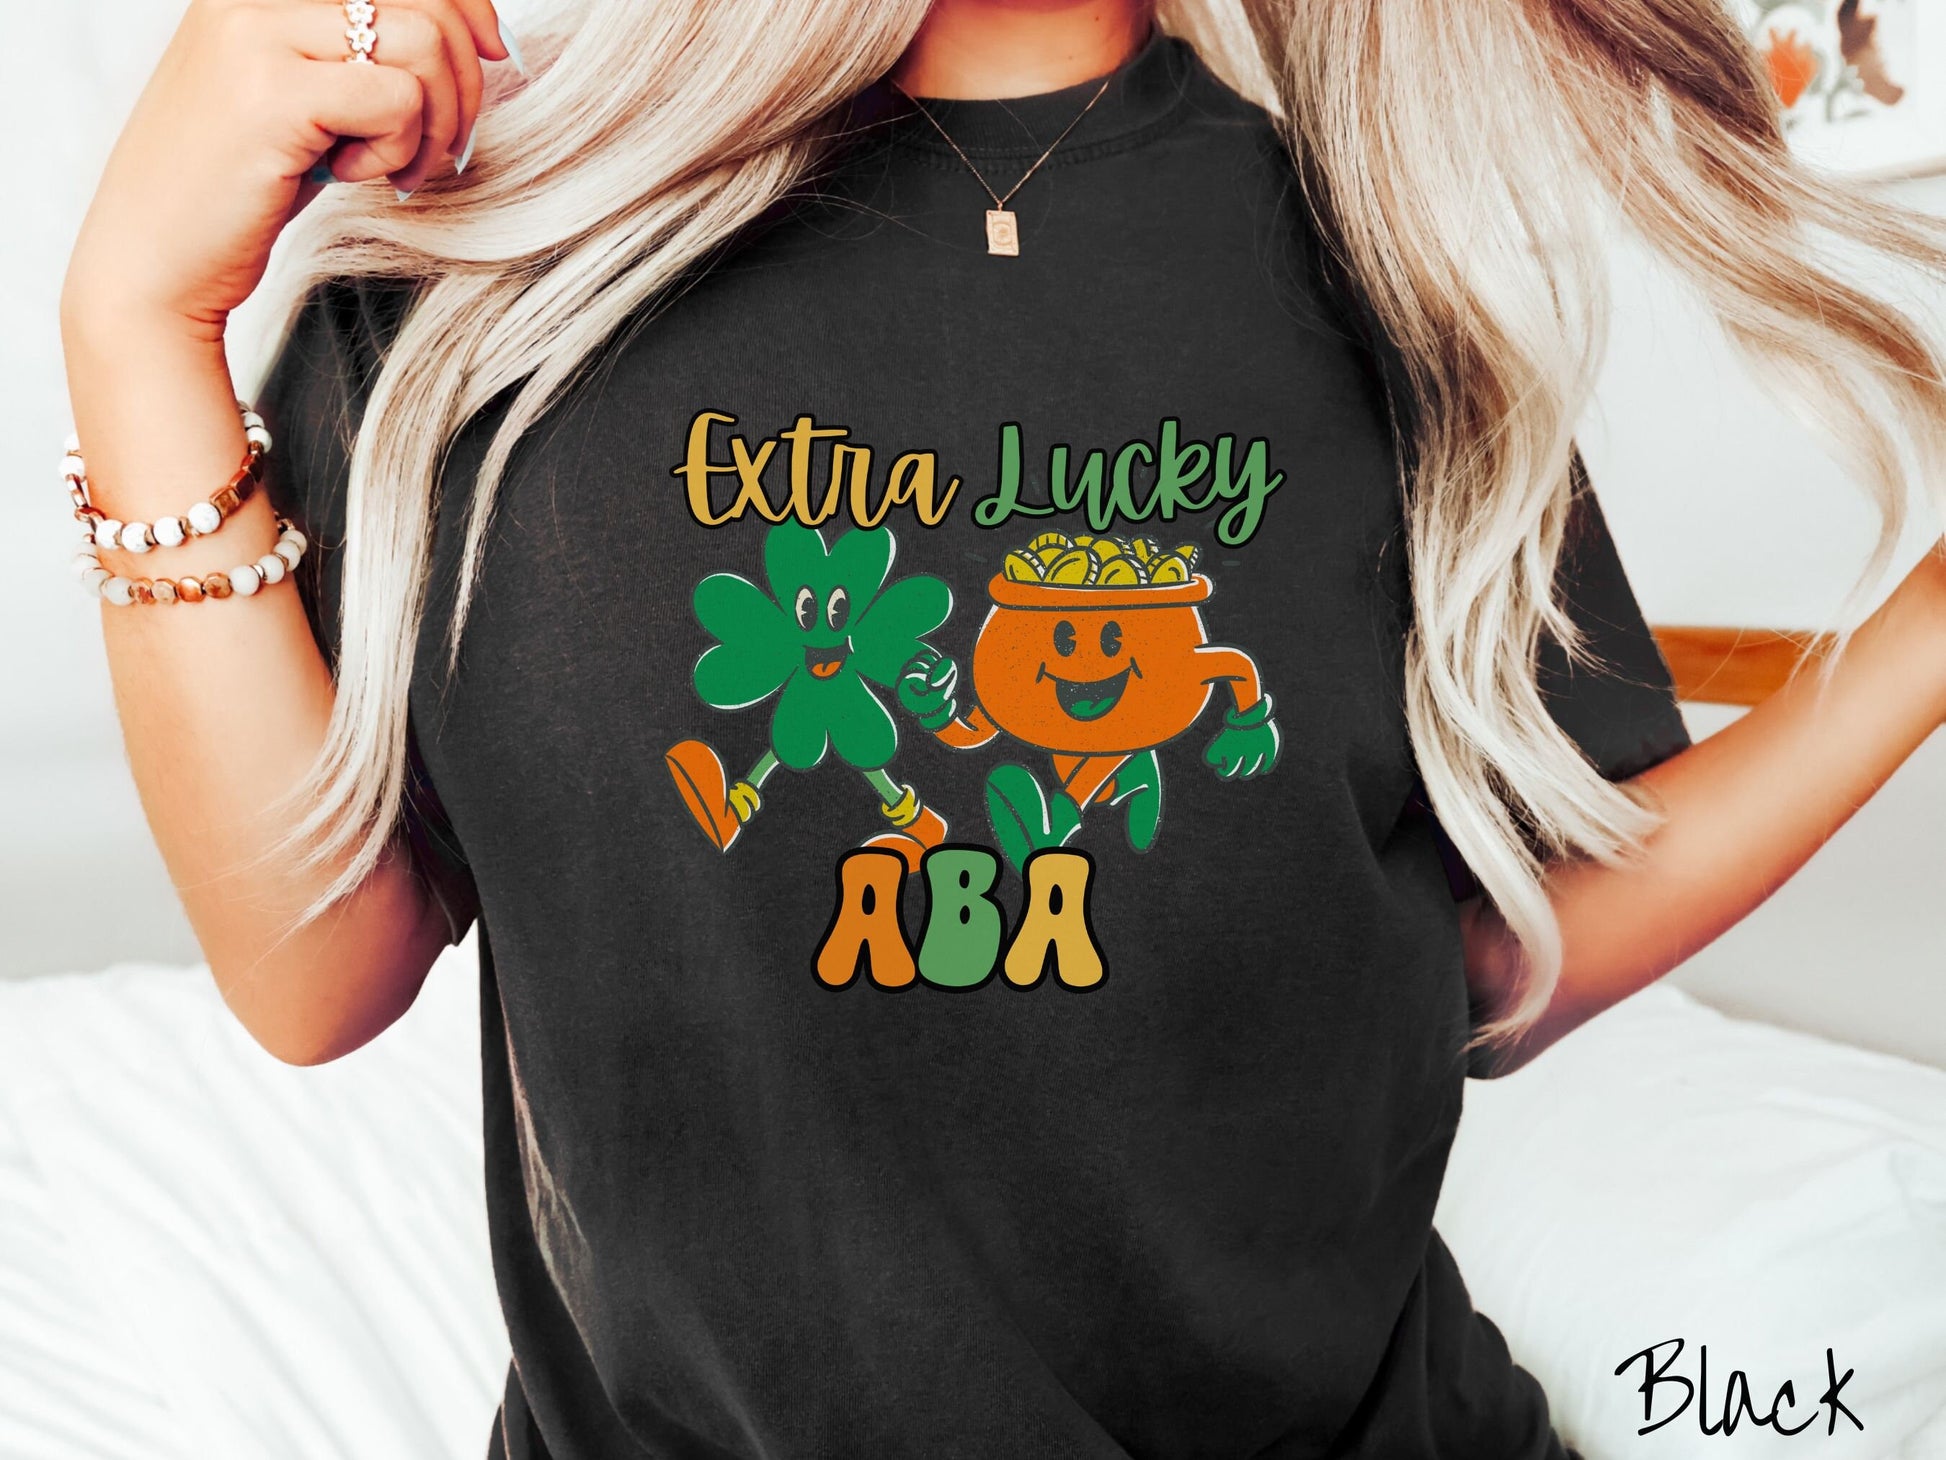 A woman wearing a vintage, black colored shirt with the text Extra Lucky ABA in yellow, orange, and green font. Between the text are a green clover and orange pot of gold smiling and walking together in step.